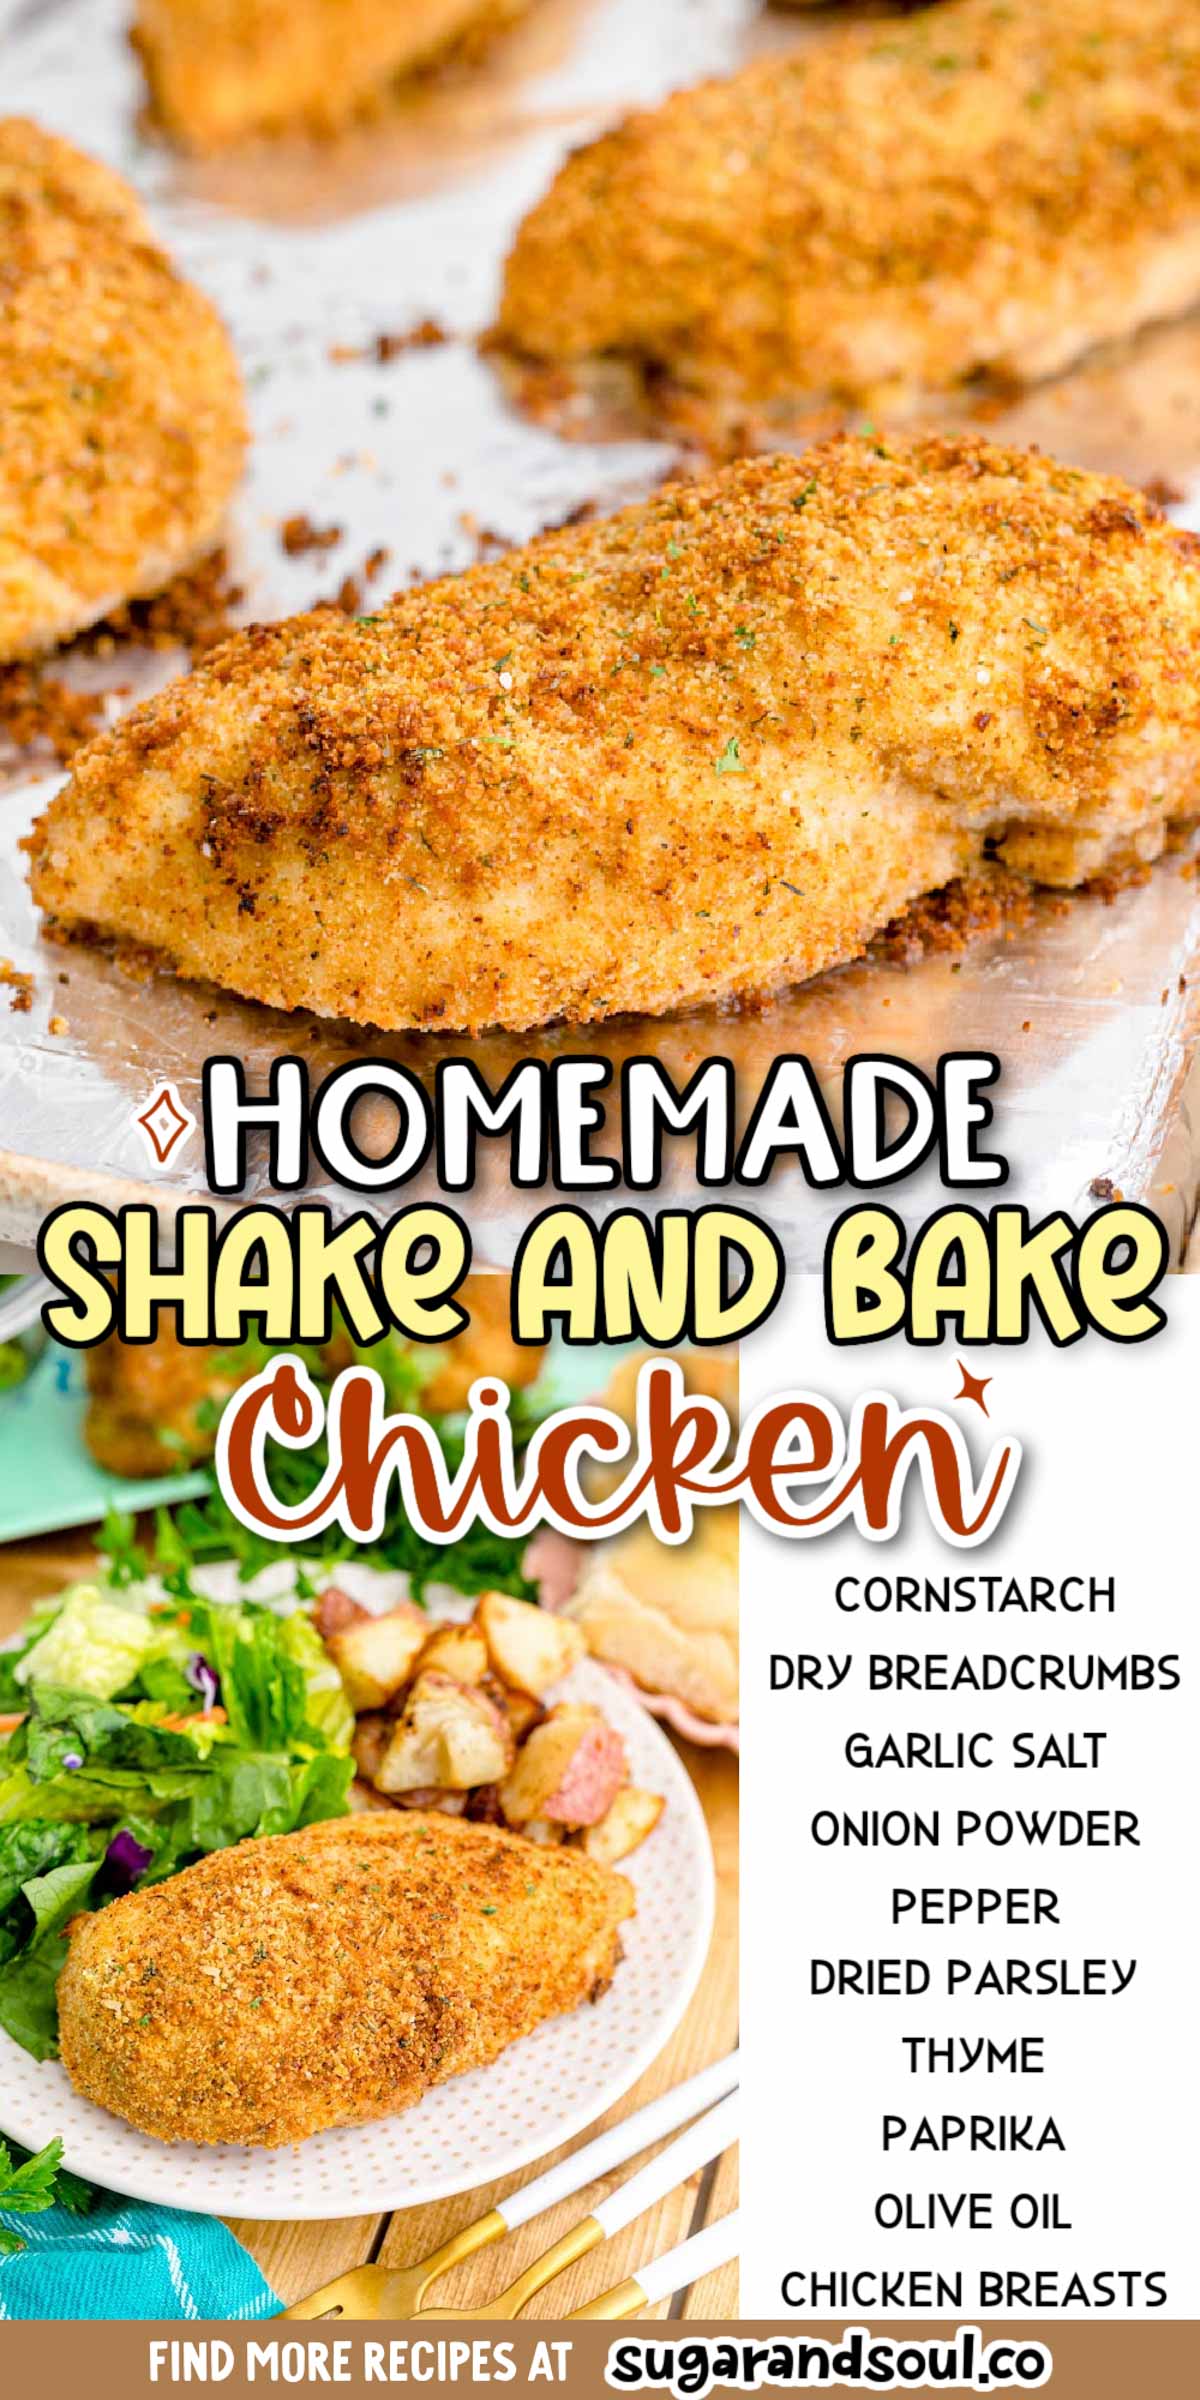 This Homemade Shake and Bake Chicken is classic comfort food that covers tender, juicy chicken with a spice-filled crunchy coating! Requires only 15 minutes of hands-on prep time, then let your oven do the rest! via @sugarandsoulco